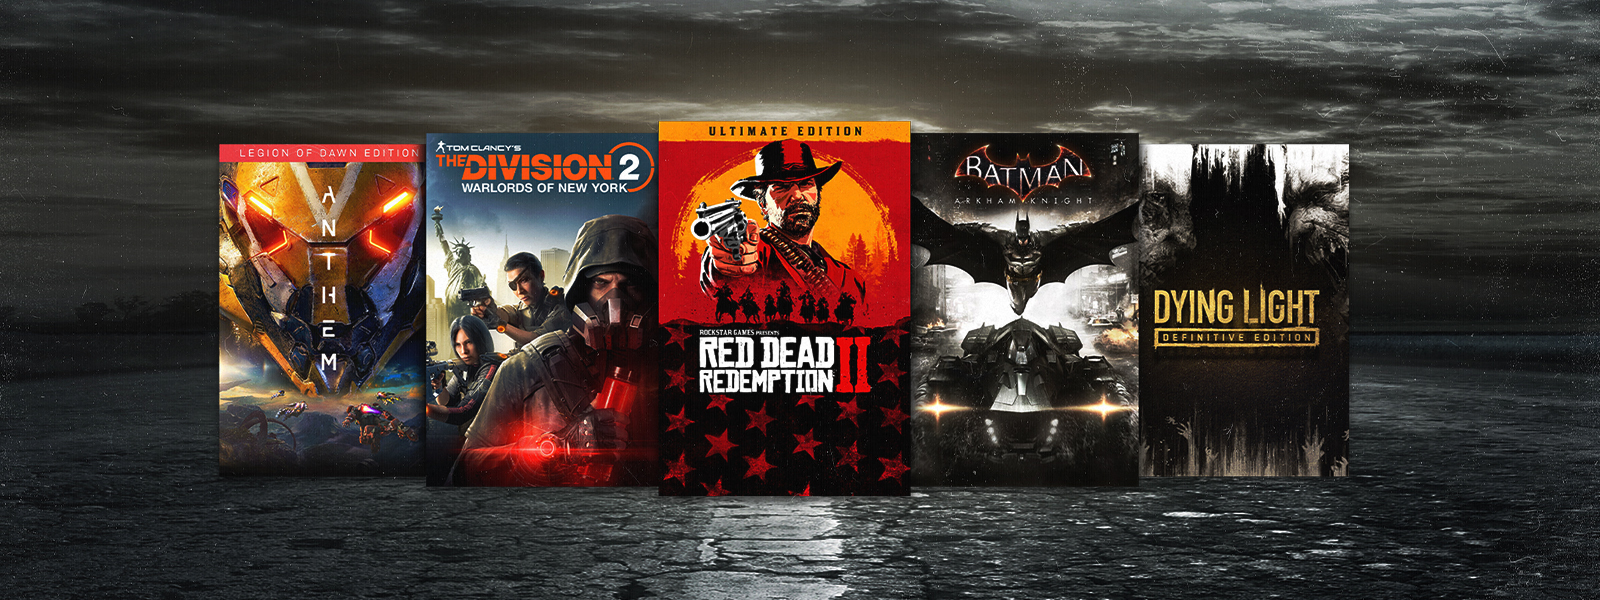 Box art from games that are part of the Action RPG Sale, including Tom Clancy’s The Division 2 Warlords of New York, Red Dead Redemption 2, and Batman Arkham Knight.